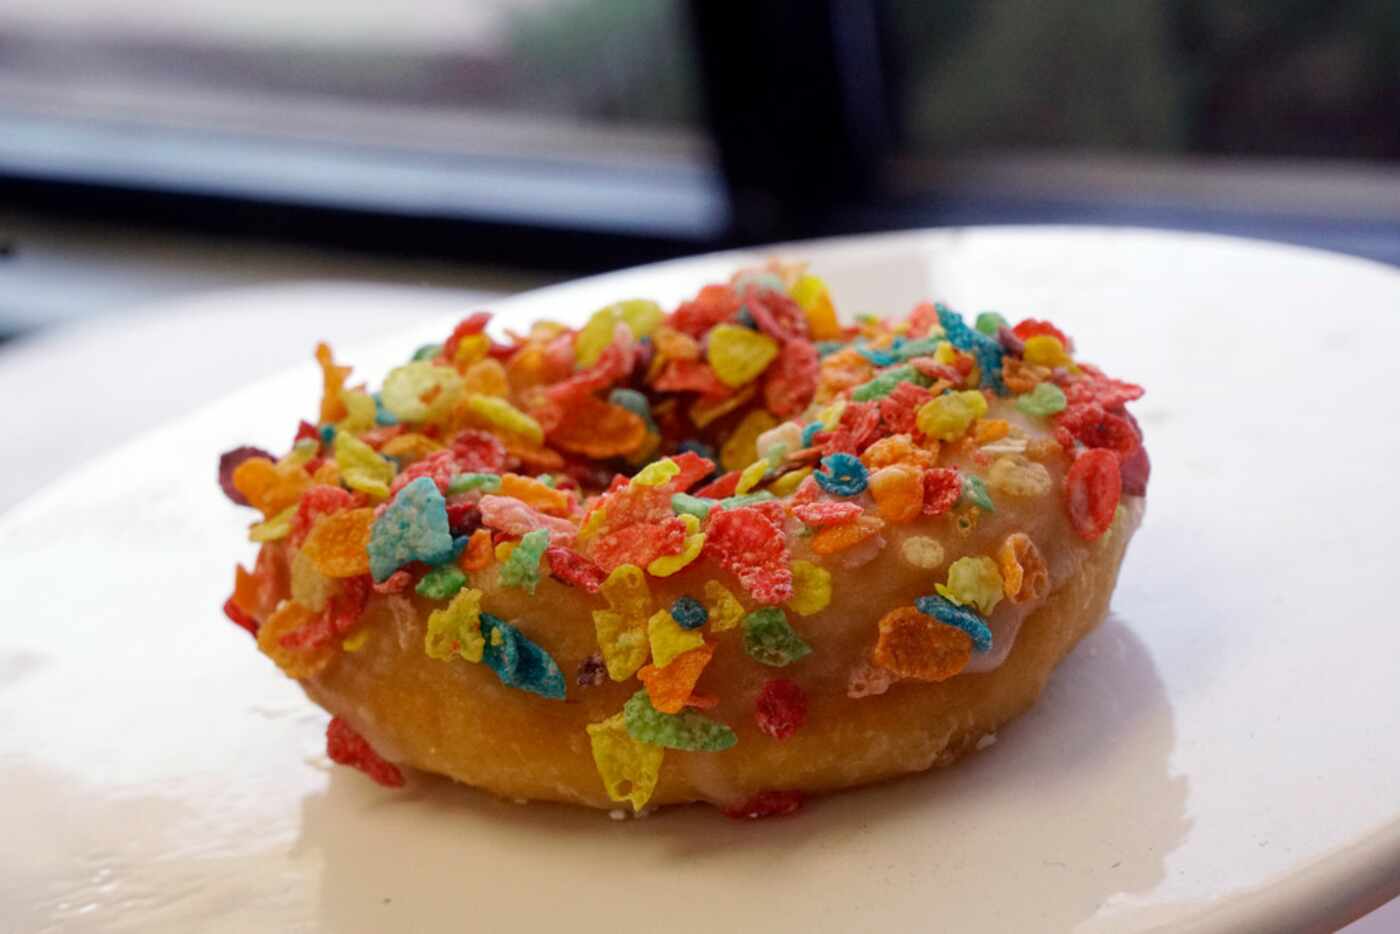 The Fairy Dust is a popular treat at Kneady Doughnuts. The store offers one cereal doughnut...